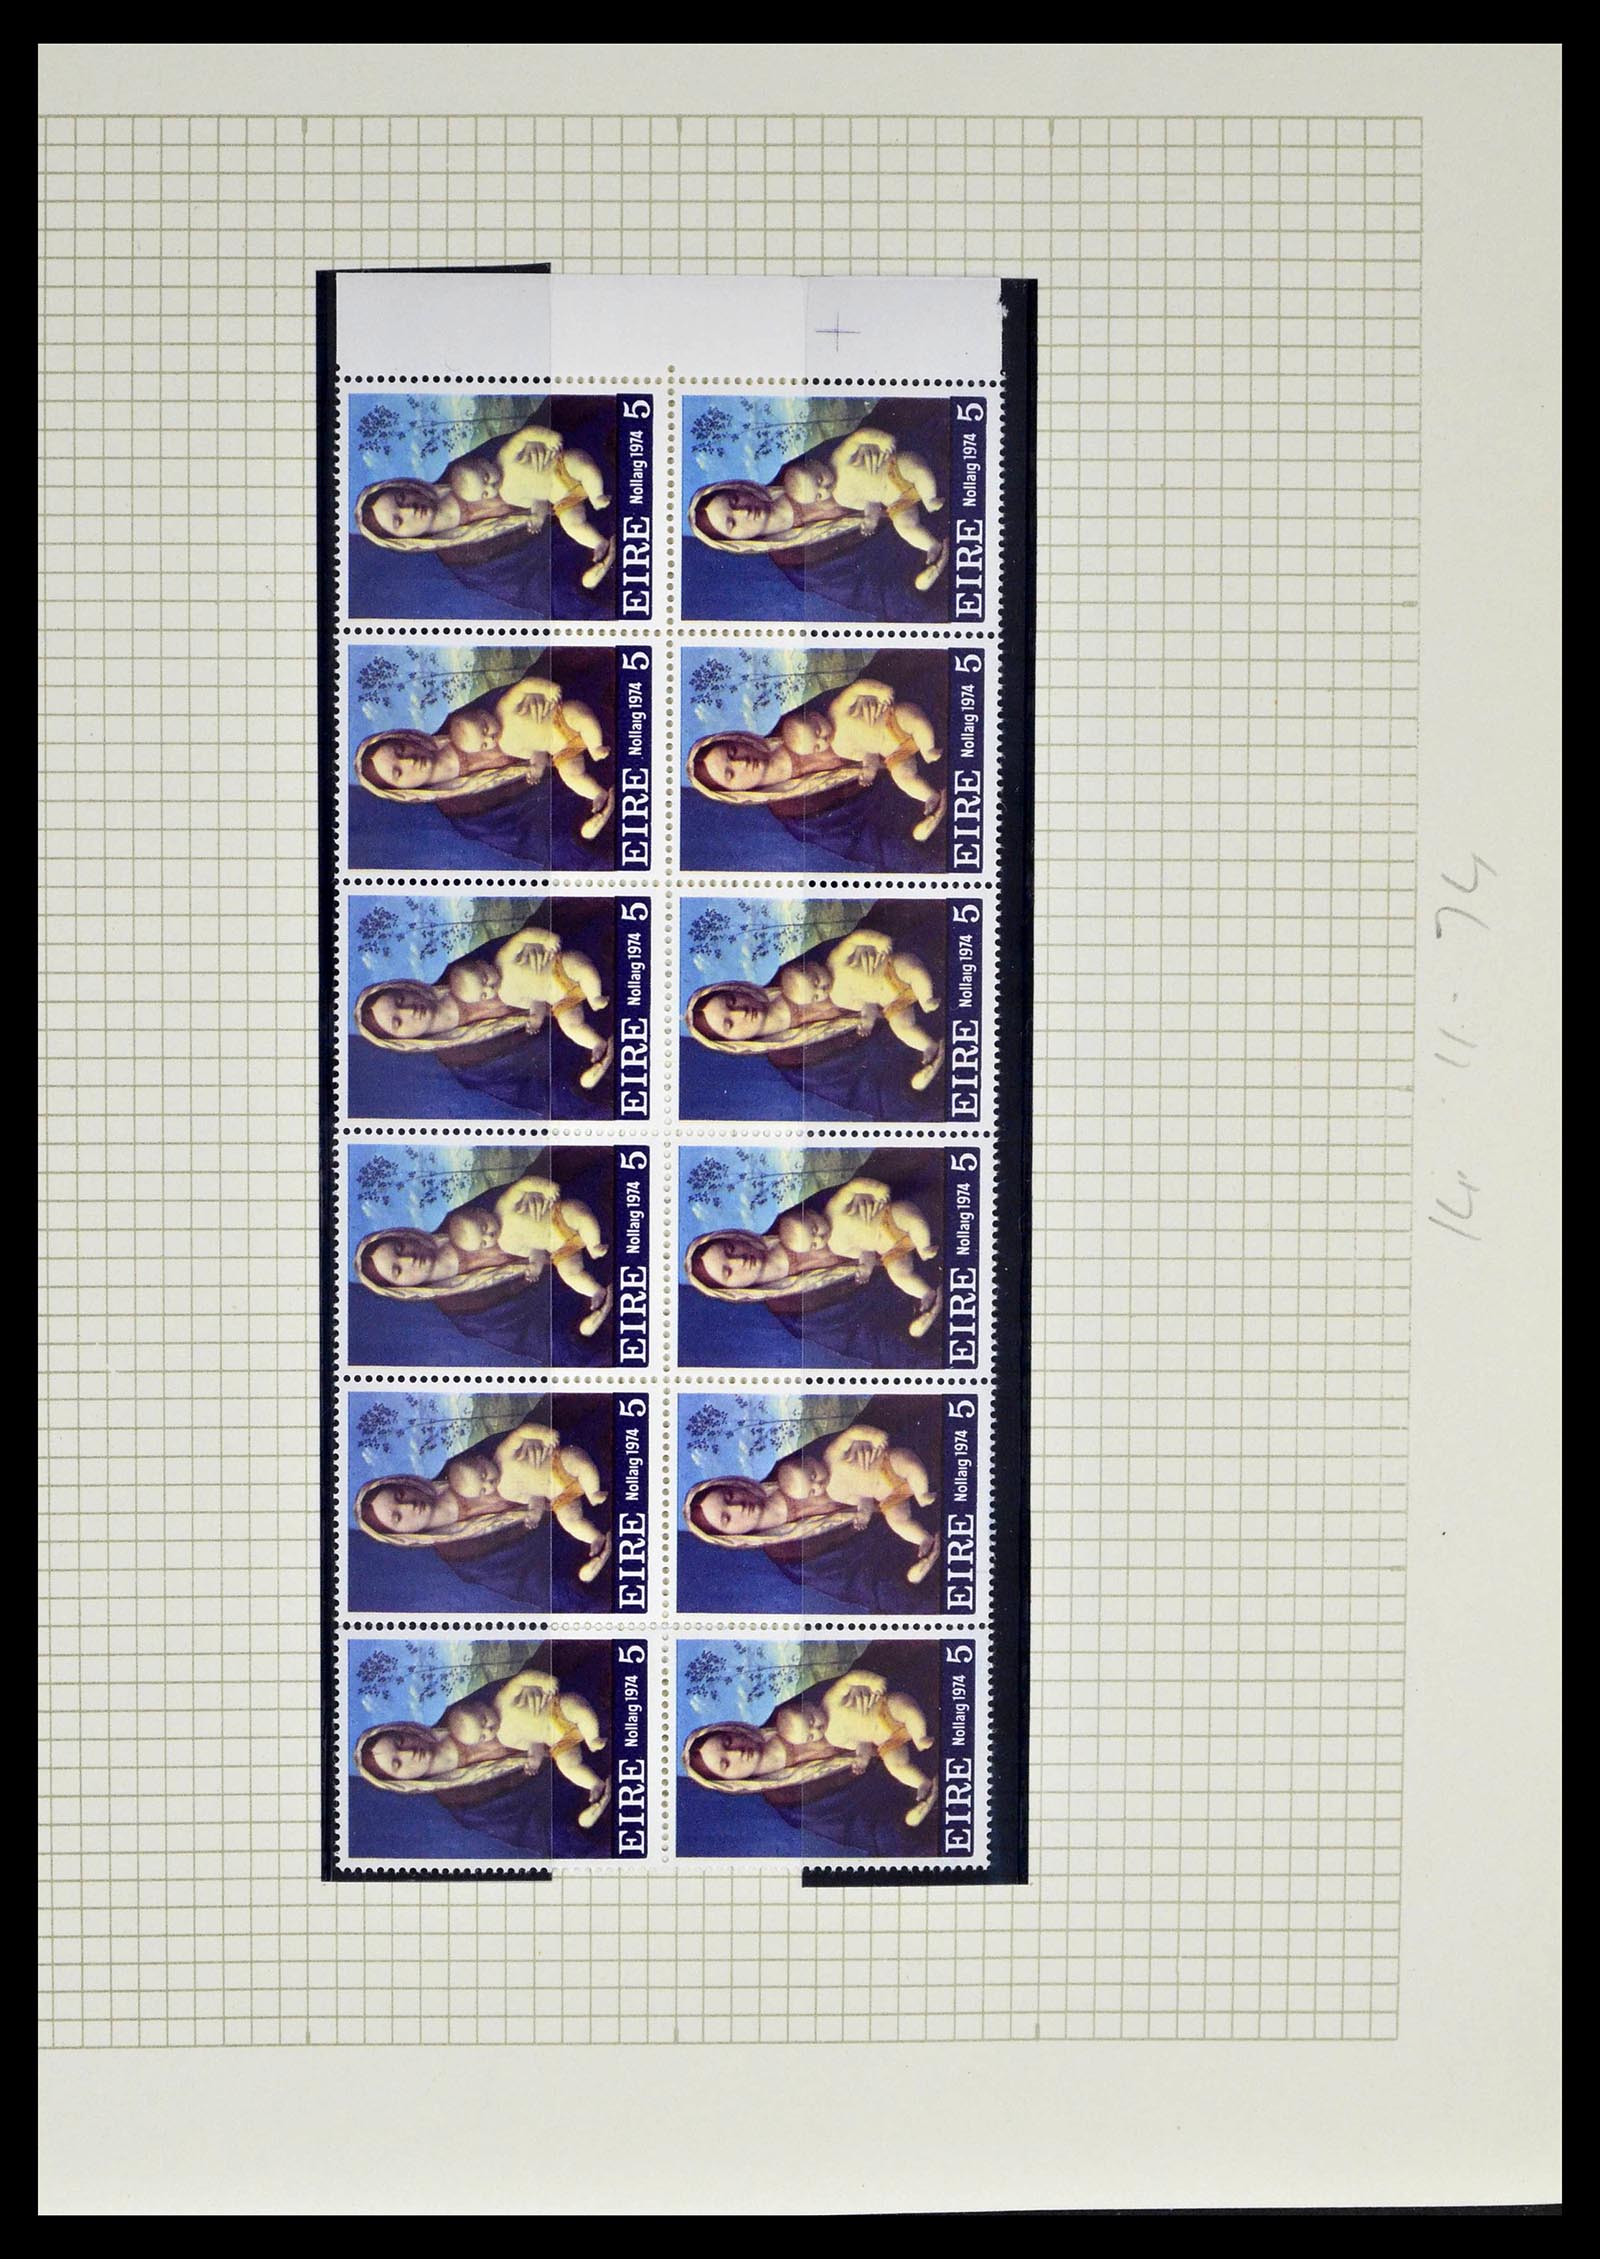 39272 0037 - Stamp collection 39272 Ireland plateflaws and varities 1963-1981.